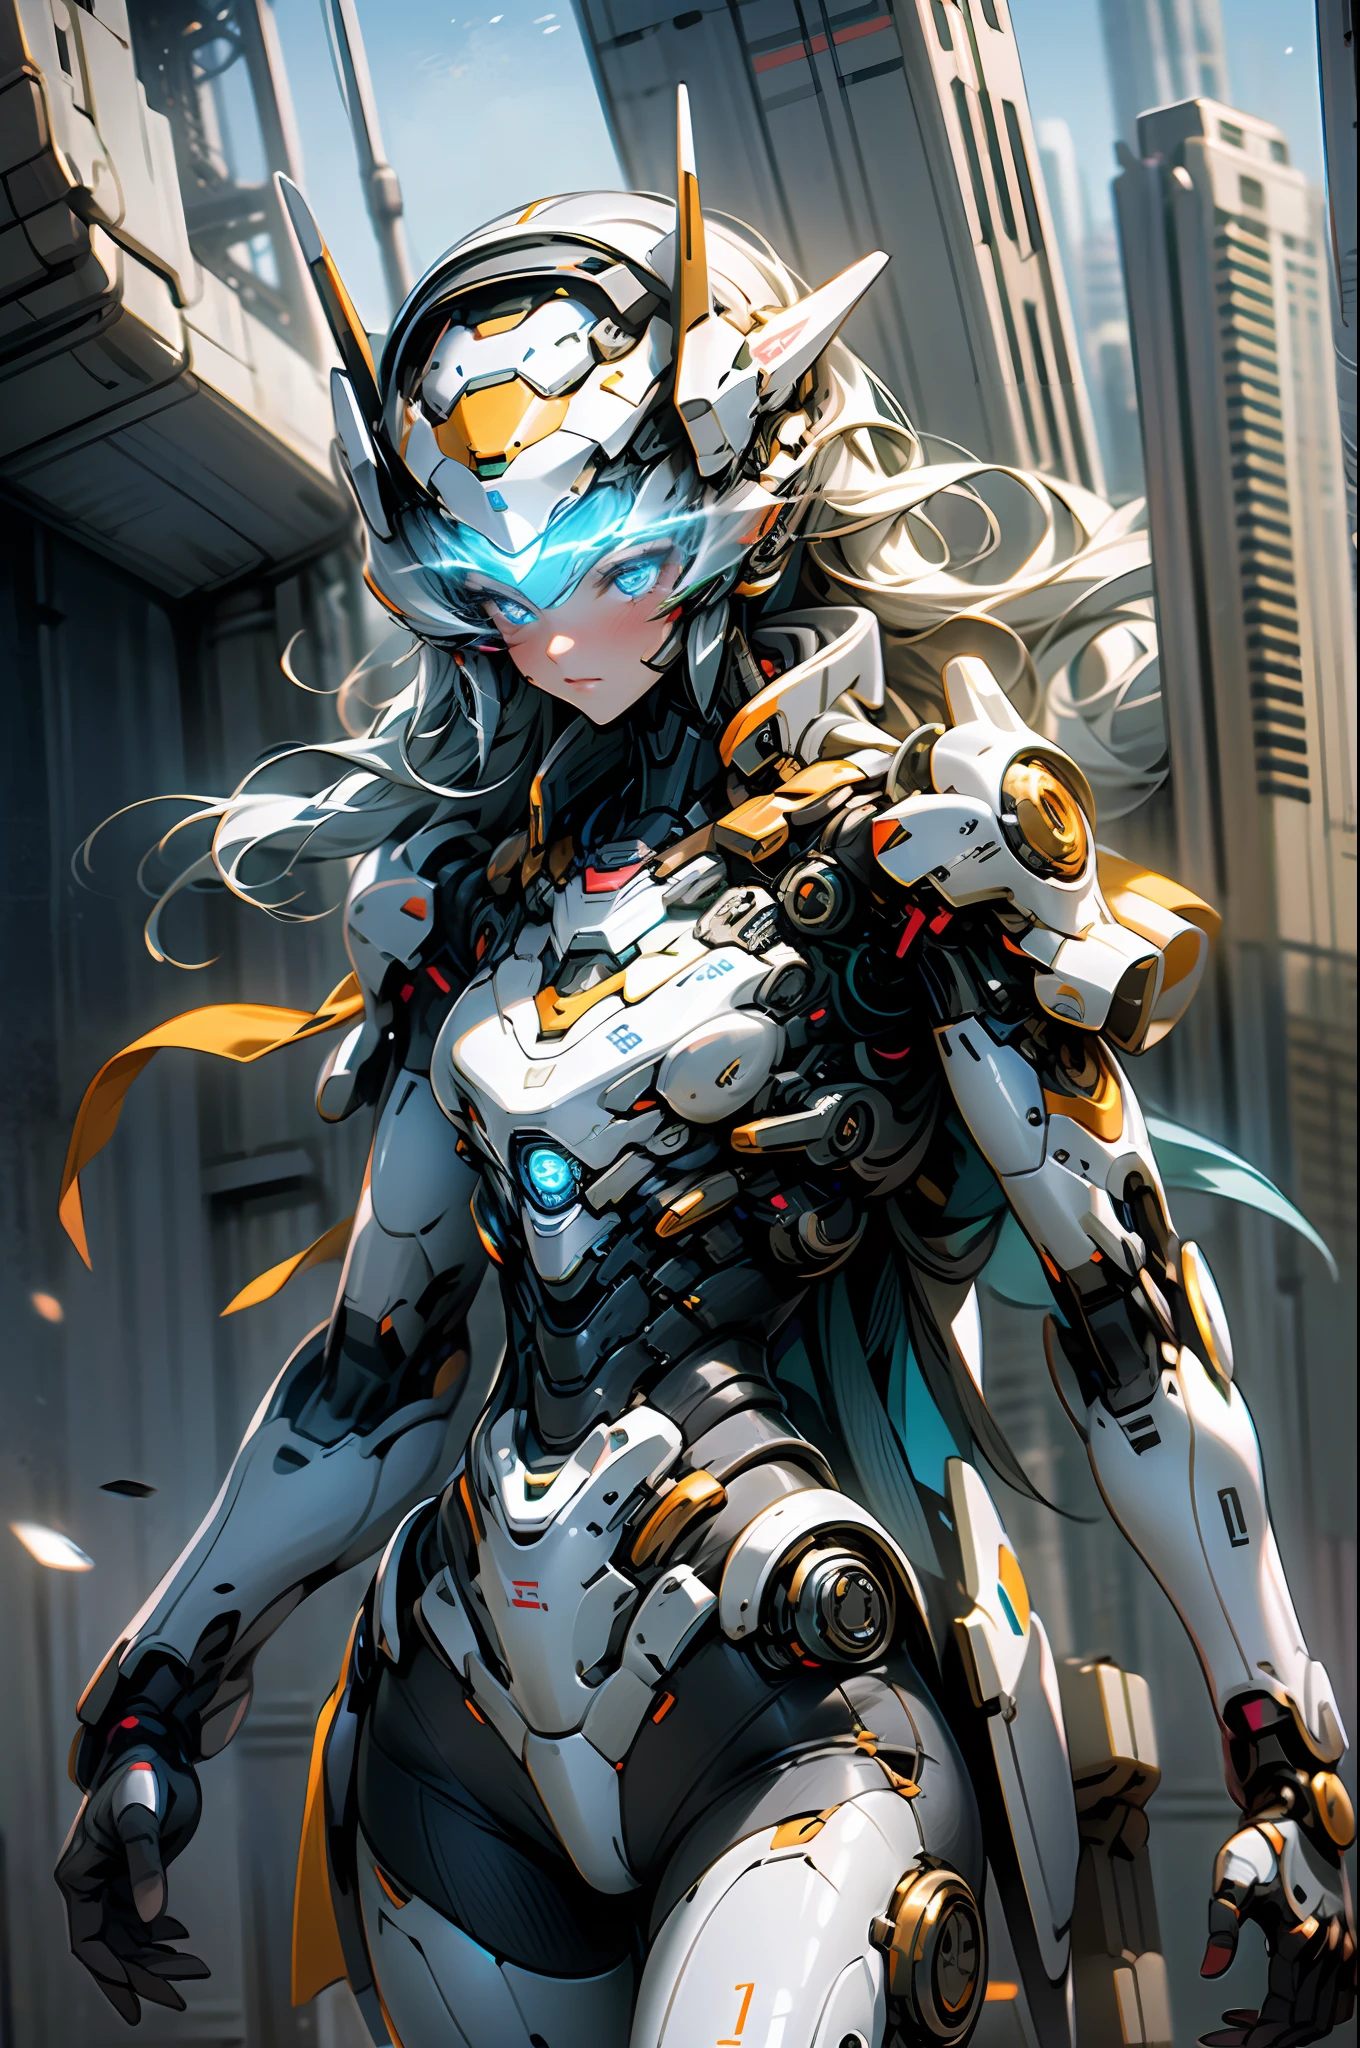 In a world where futuristic technology and fantasy are intertwined, a mecha girl proudly appears. She is dressed in high-tech full-body mecha armor, made of magnesium alloy and advanced nanomaterials, shining with a metallic sheen. The armor's design combines streamlined and combat functions, showcasing the innovation and beauty of futuristic technology.

The Mech Maiden's helmet is equipped with advanced integrated sensors that analyze the environment in real time and provide important data. Her eyes revealed firmness and wisdom, and her eyes flashed with mechanical light. Her steps are firm and graceful, showing the flexibility and strength of the mech.

This stunning scene was captured by genius photographer Annie Leibovitz. She cleverly uses the Leica S3 camera to capture the mystery and power of the mech girl. The camera is set to a shutter speed of 1/250, an aperture of f/5.6, and an ISO of 400 to highlight the detail and texture of the mecha's armor.

In the background, a futuristic city of high-rise buildings and flying vehicles traverse busy streets. Futuristic technology elements float in the sky, such as flying machines and floating displays, adding a futuristic and fantastical feel to the scene.

The mech girl's posture shows her fighting skills and confidence. She holds an energy sword in one hand, emitting a blue or green glow, symbolizing strength and determination. Her other hand holds a high-tech energy shield, demonstrating her defensive abilities.

This stunning photo captures the charm and power of the mech girl, showing the wondrous fusion of technology and whimsical worlds. It is a tribute to future technology and human creativity, inspiring imagination of what is possible in the future.